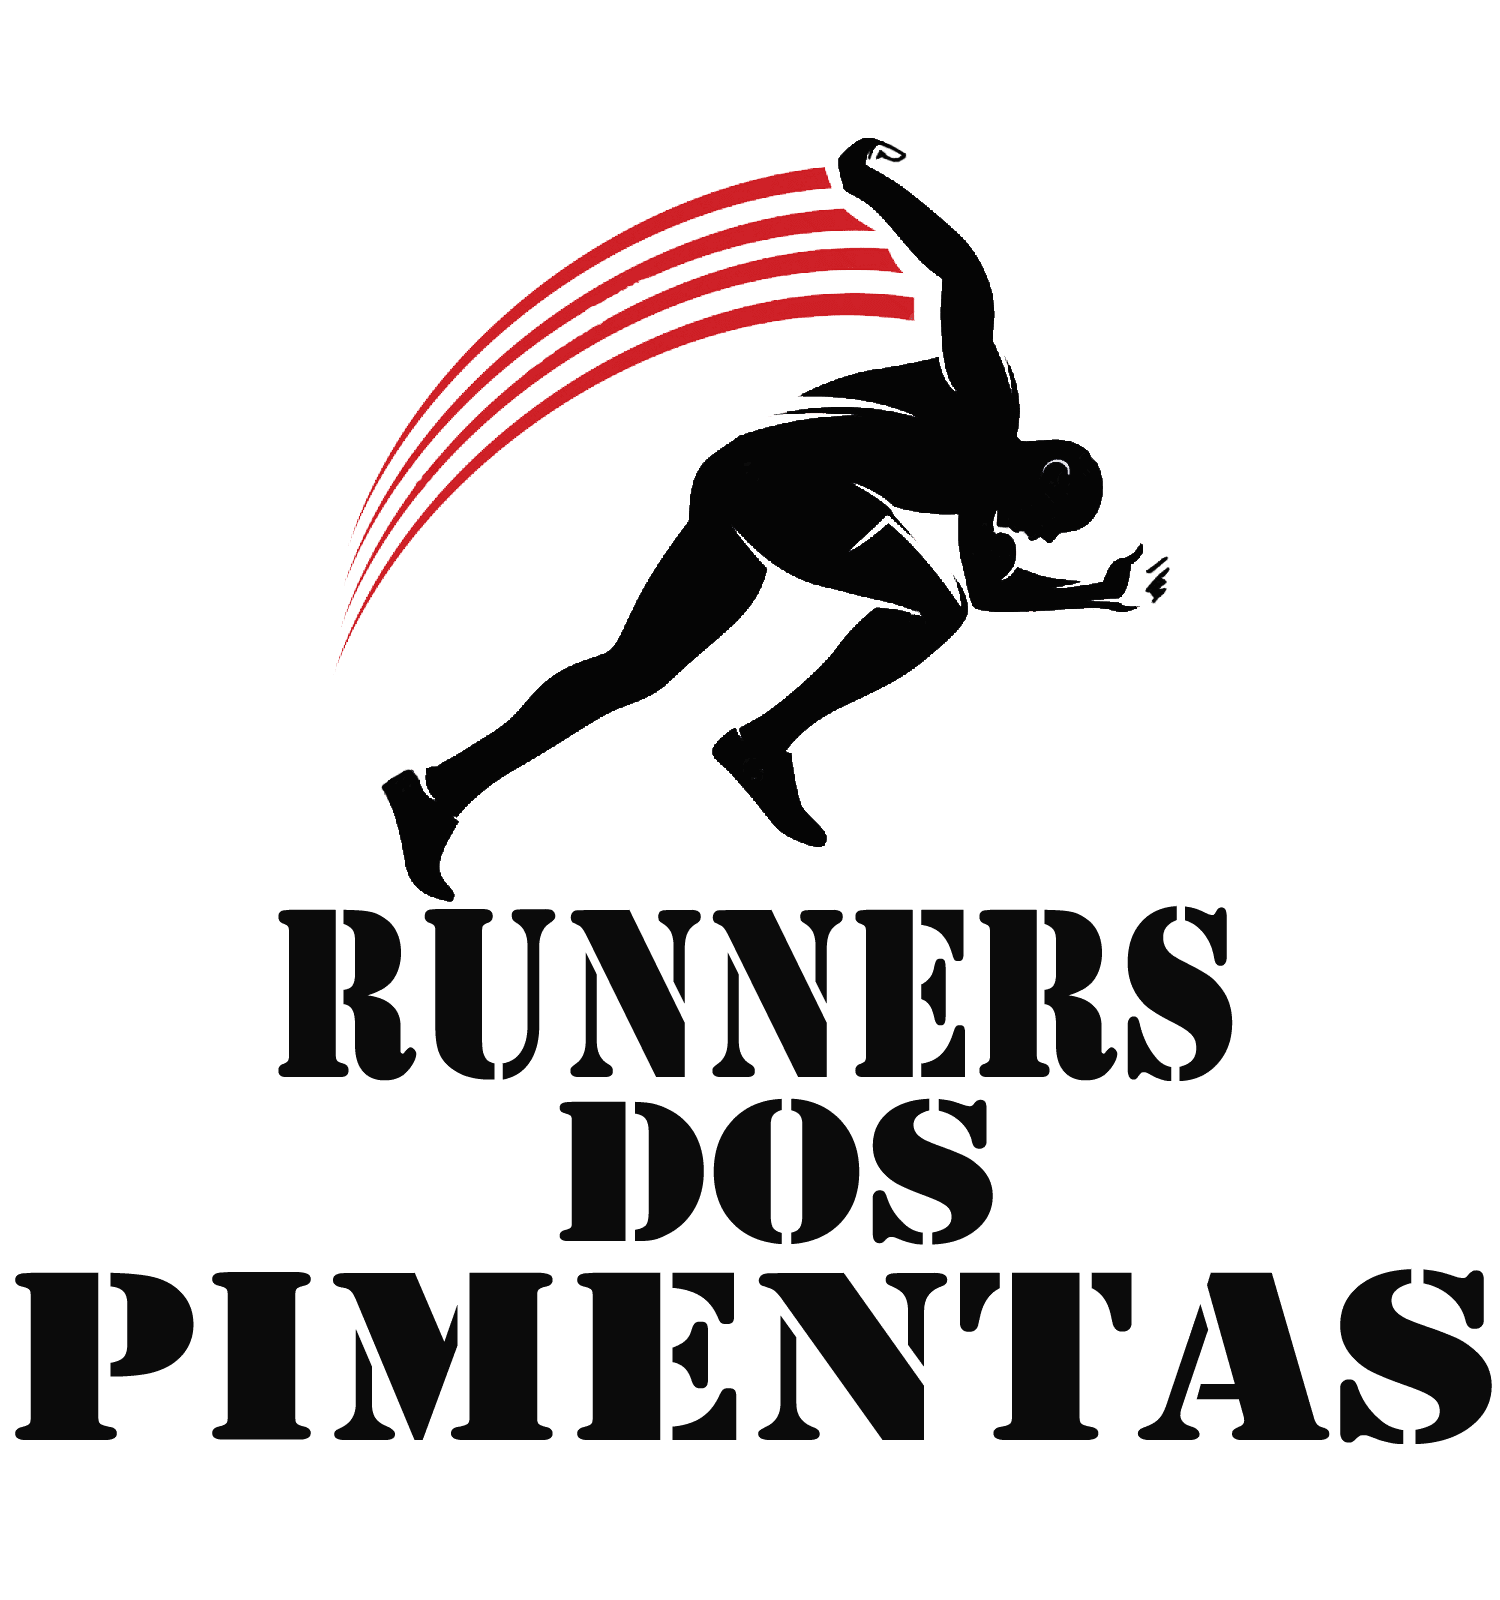 Runners dos Pimentas